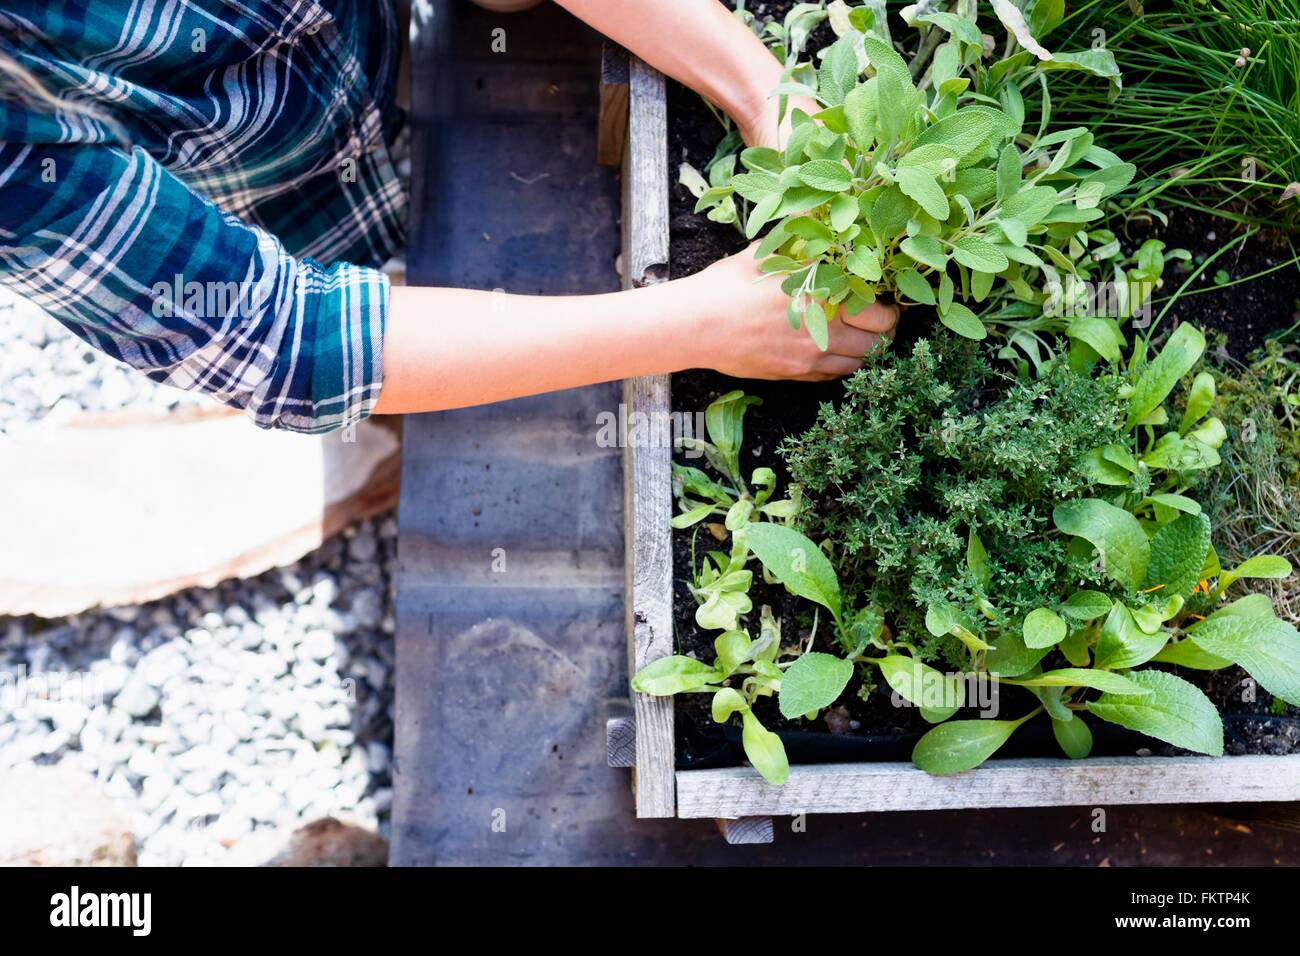 Woman planting herbs in herb garden, high angle Stock Photo